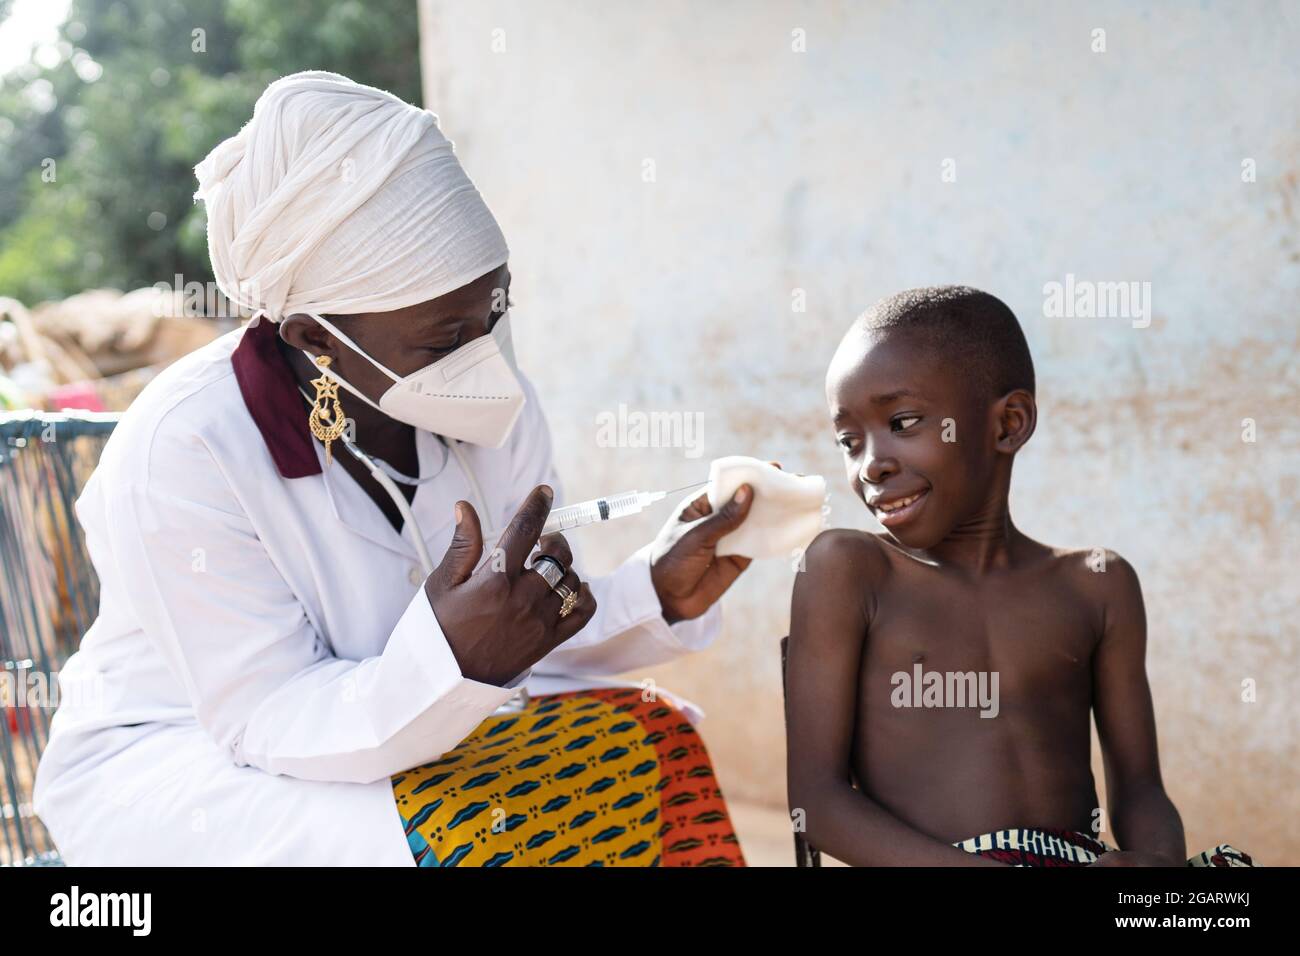 In this image a black nurse with face mask and hospital uniform is trying to explain a confident looking little African boy how she's going to inject Stock Photo